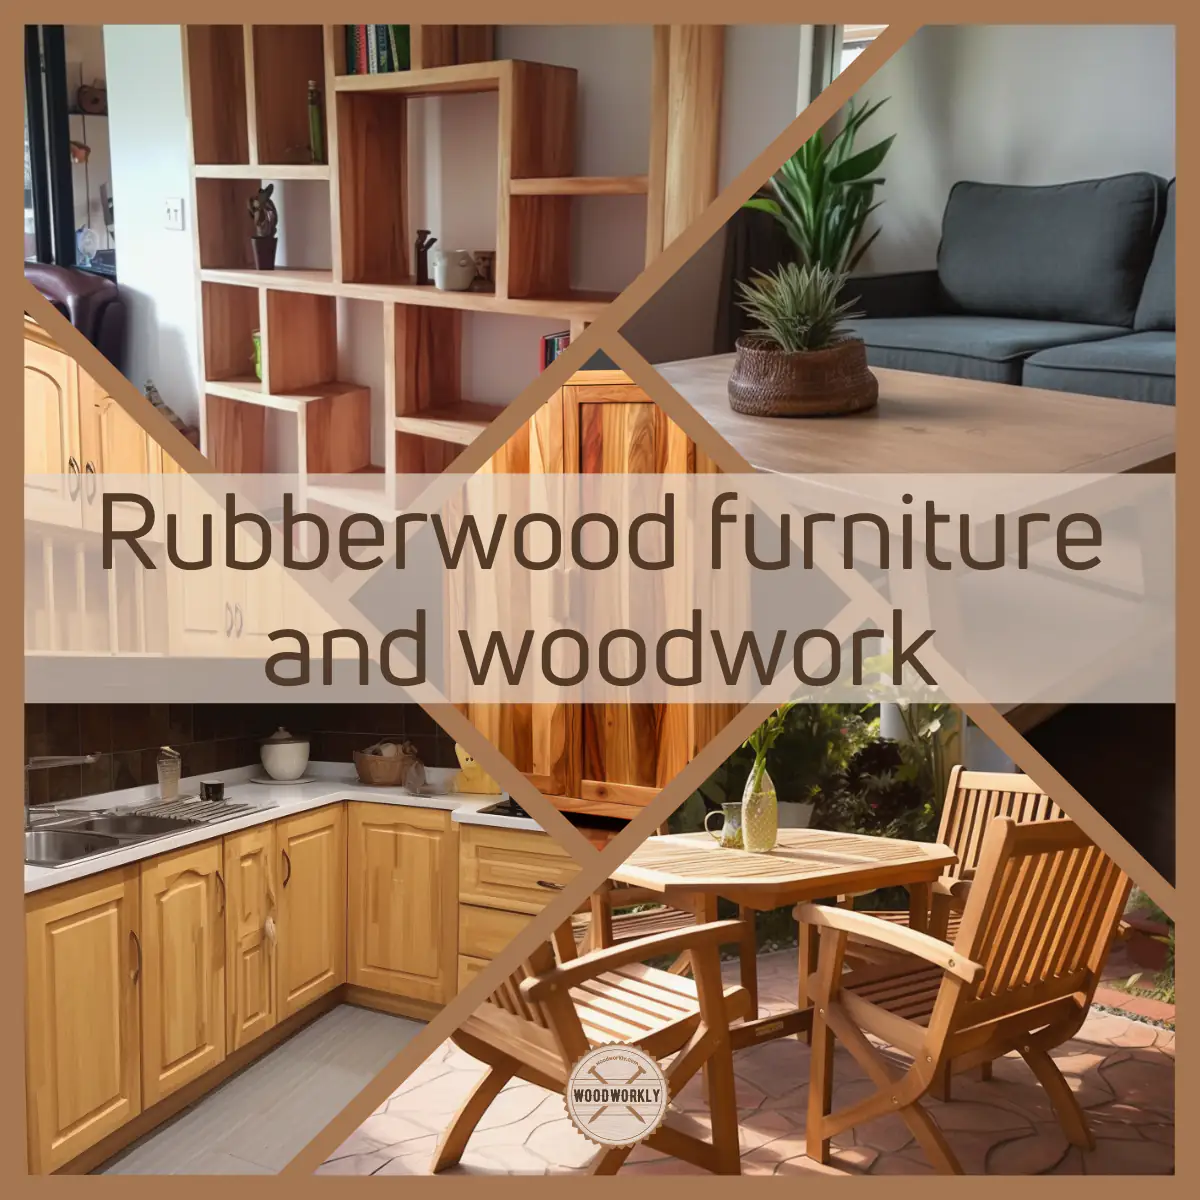 Rubberwood furniture and woodwork